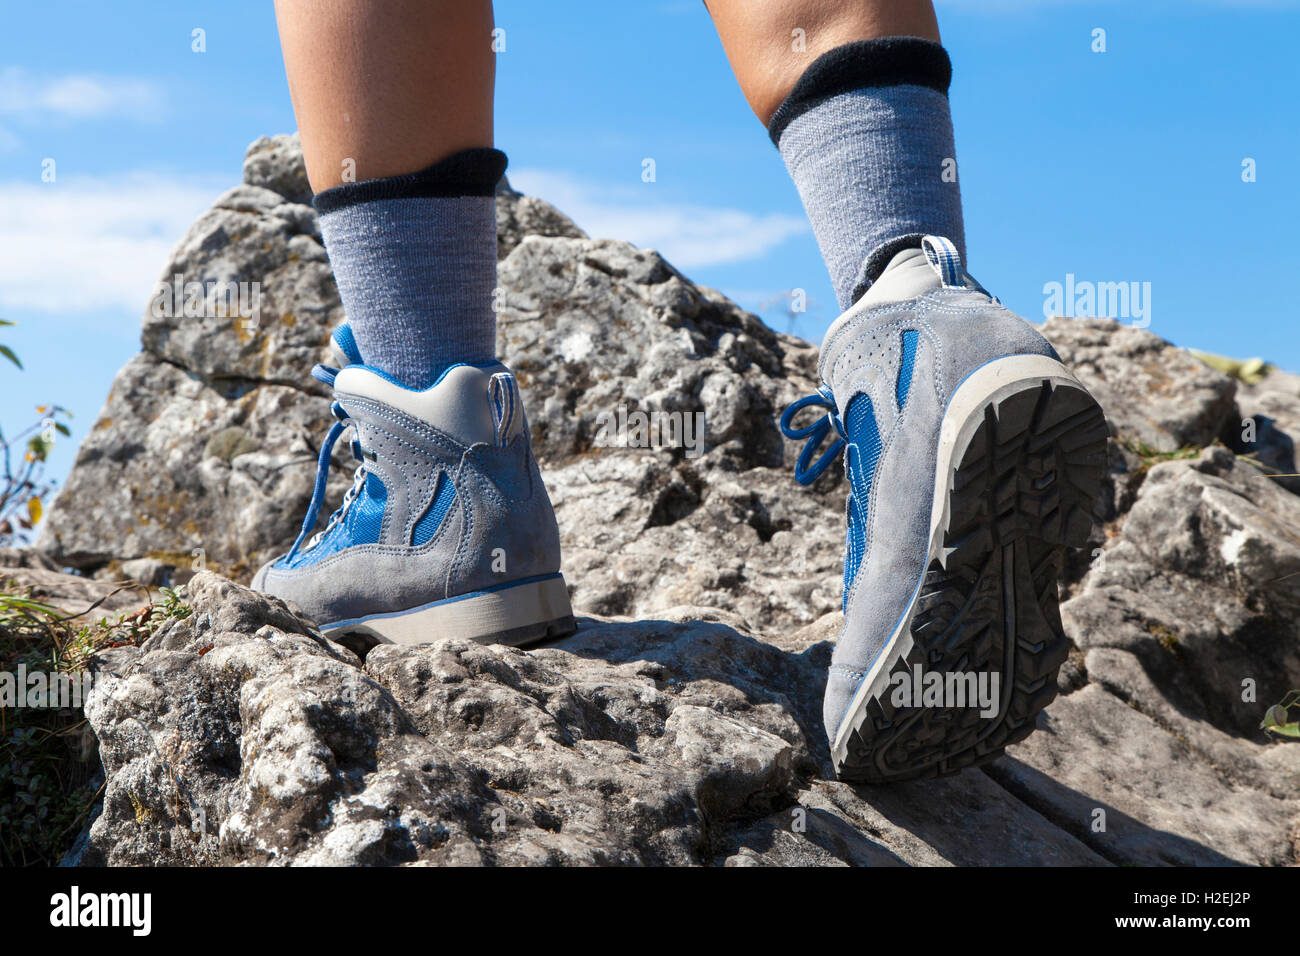 Close up of hiking boots and legs climbing up rocky trail Stock Photo